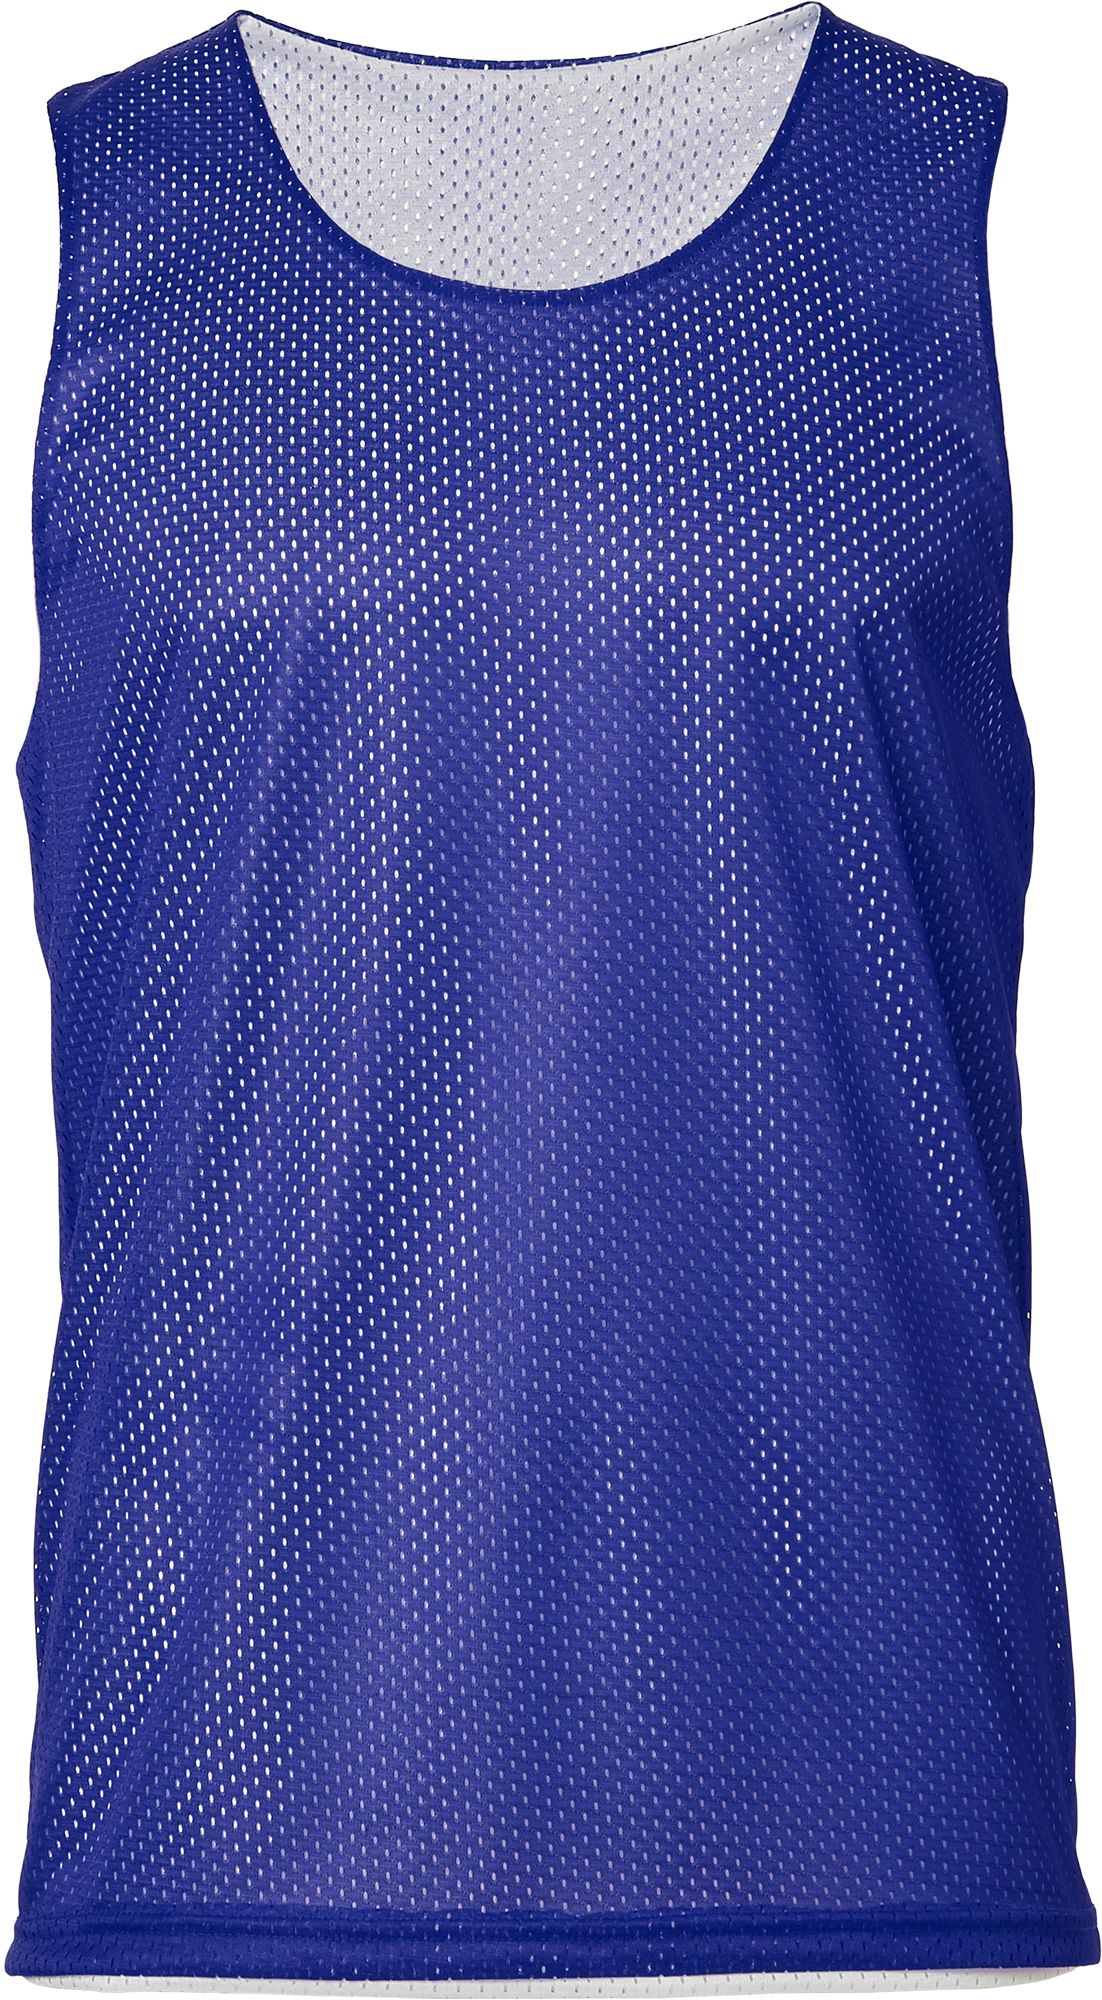 penny practice jersey